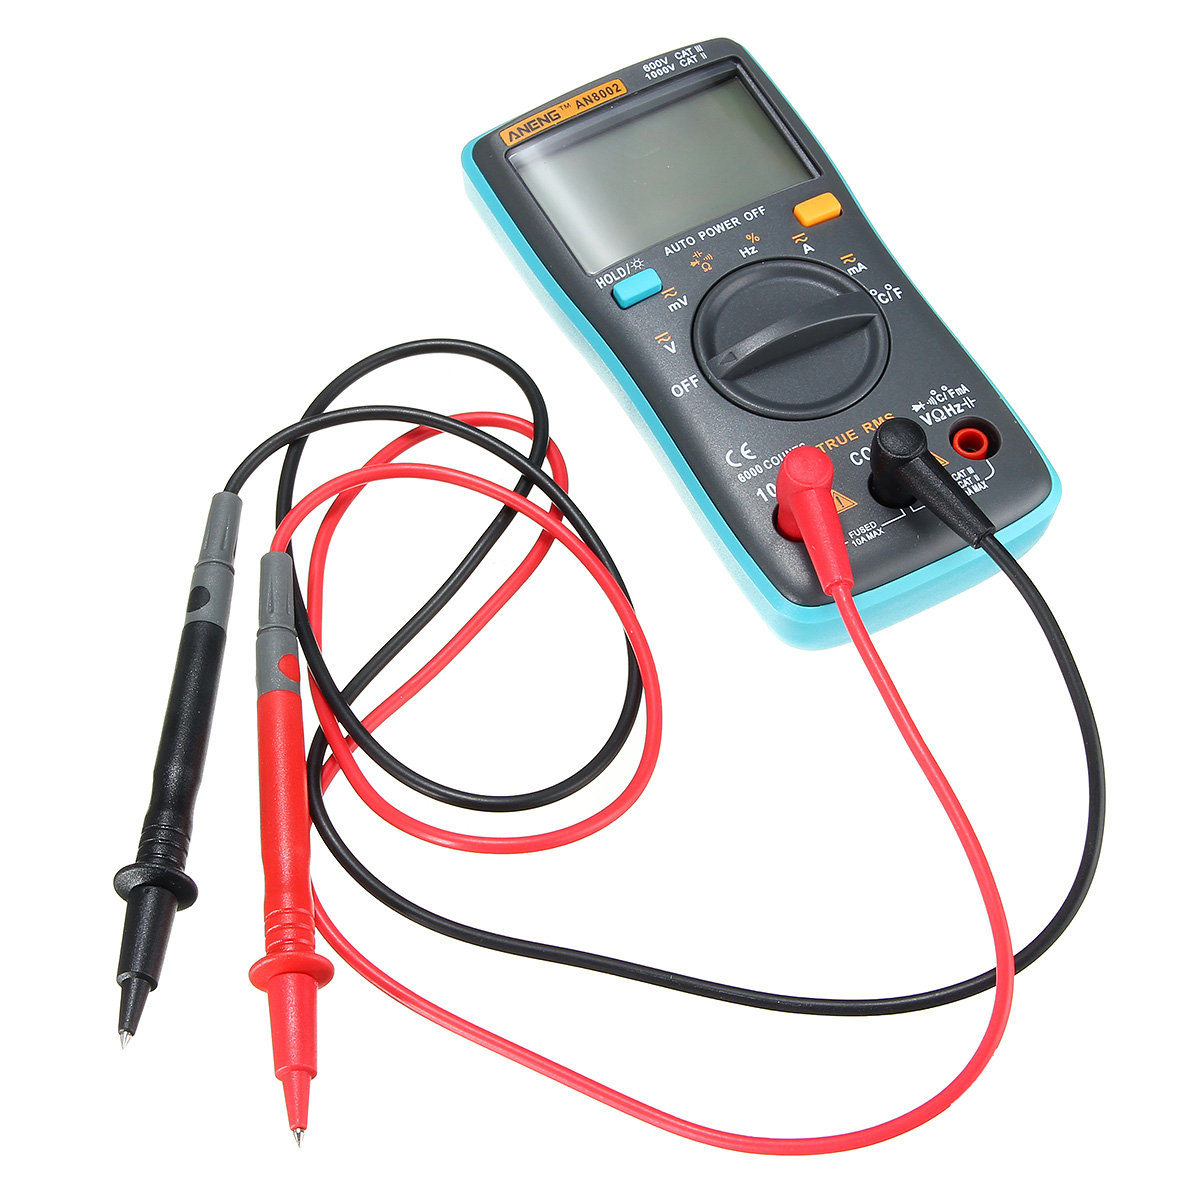 ANENG AN8002 Digital True RMS 6000 Counts Multimeter AC/DC Current Voltage Frequency Resistance Temperature Tester ℃/℉ 129